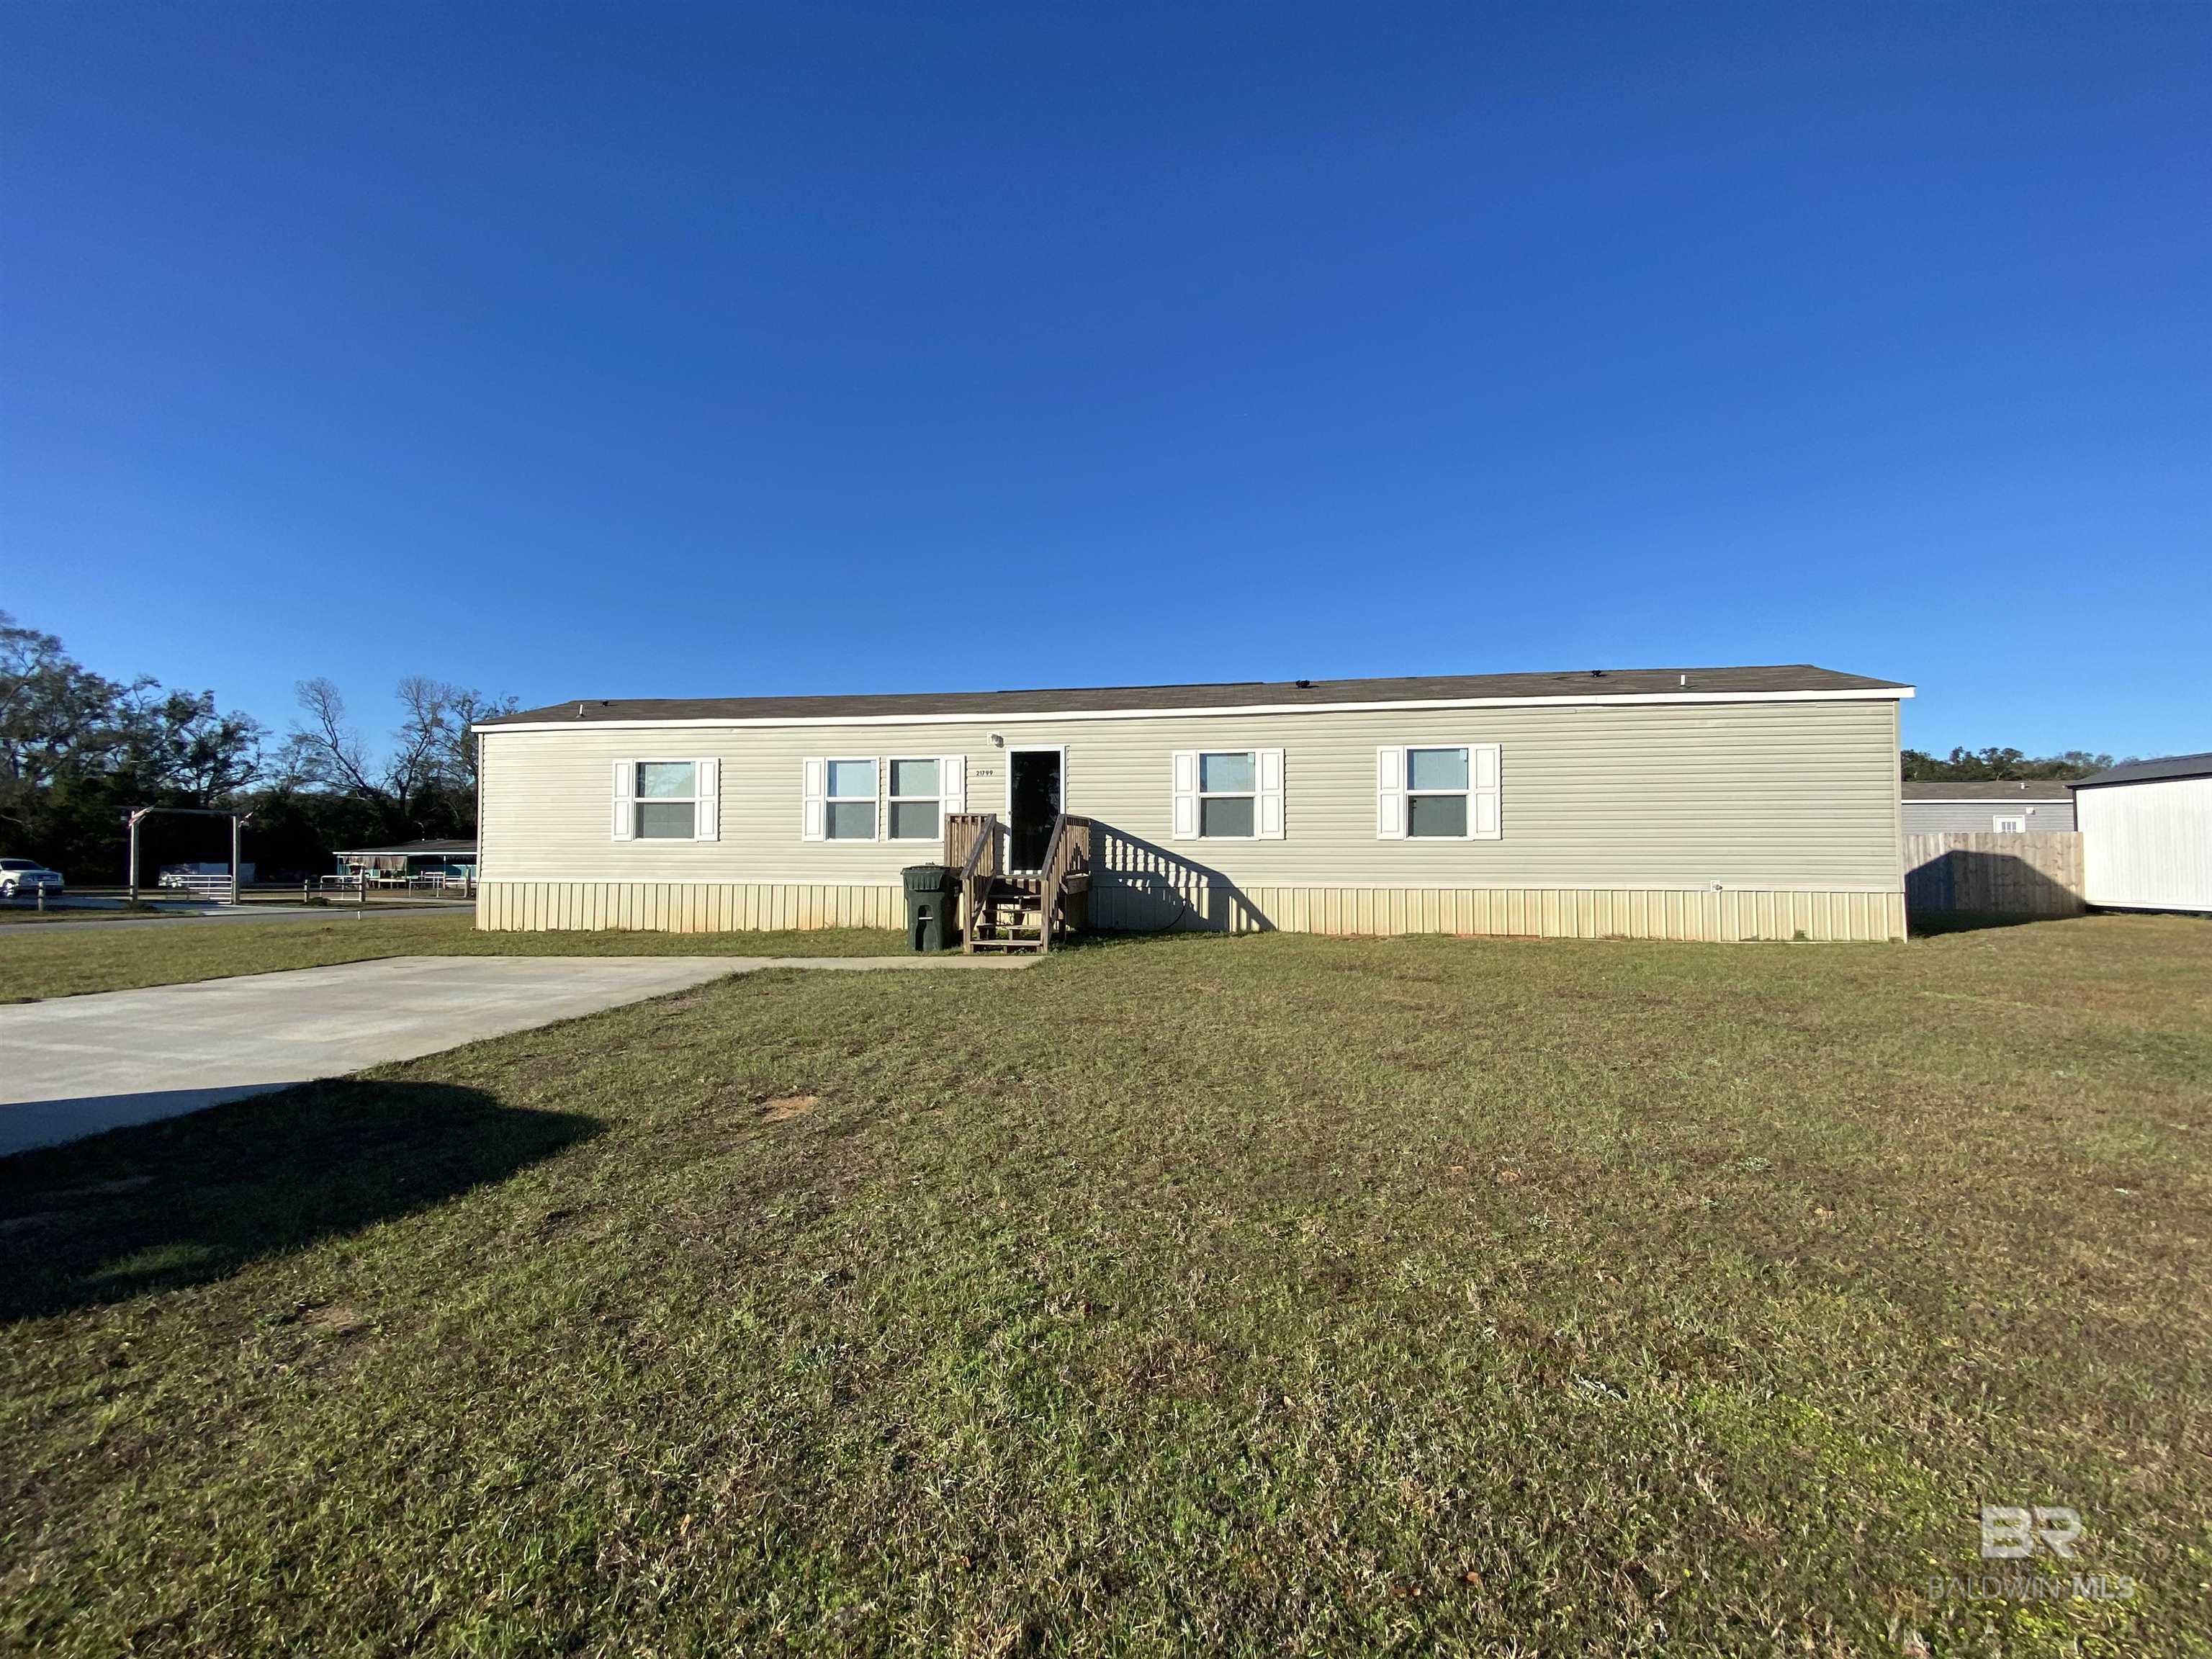 Great single wide manufactured home in a quite manufactured home development.  Great for a starter home or retirement home.  No carpet, easy to clean and care for.  Master bath has double sinks and nice size walk in closet.